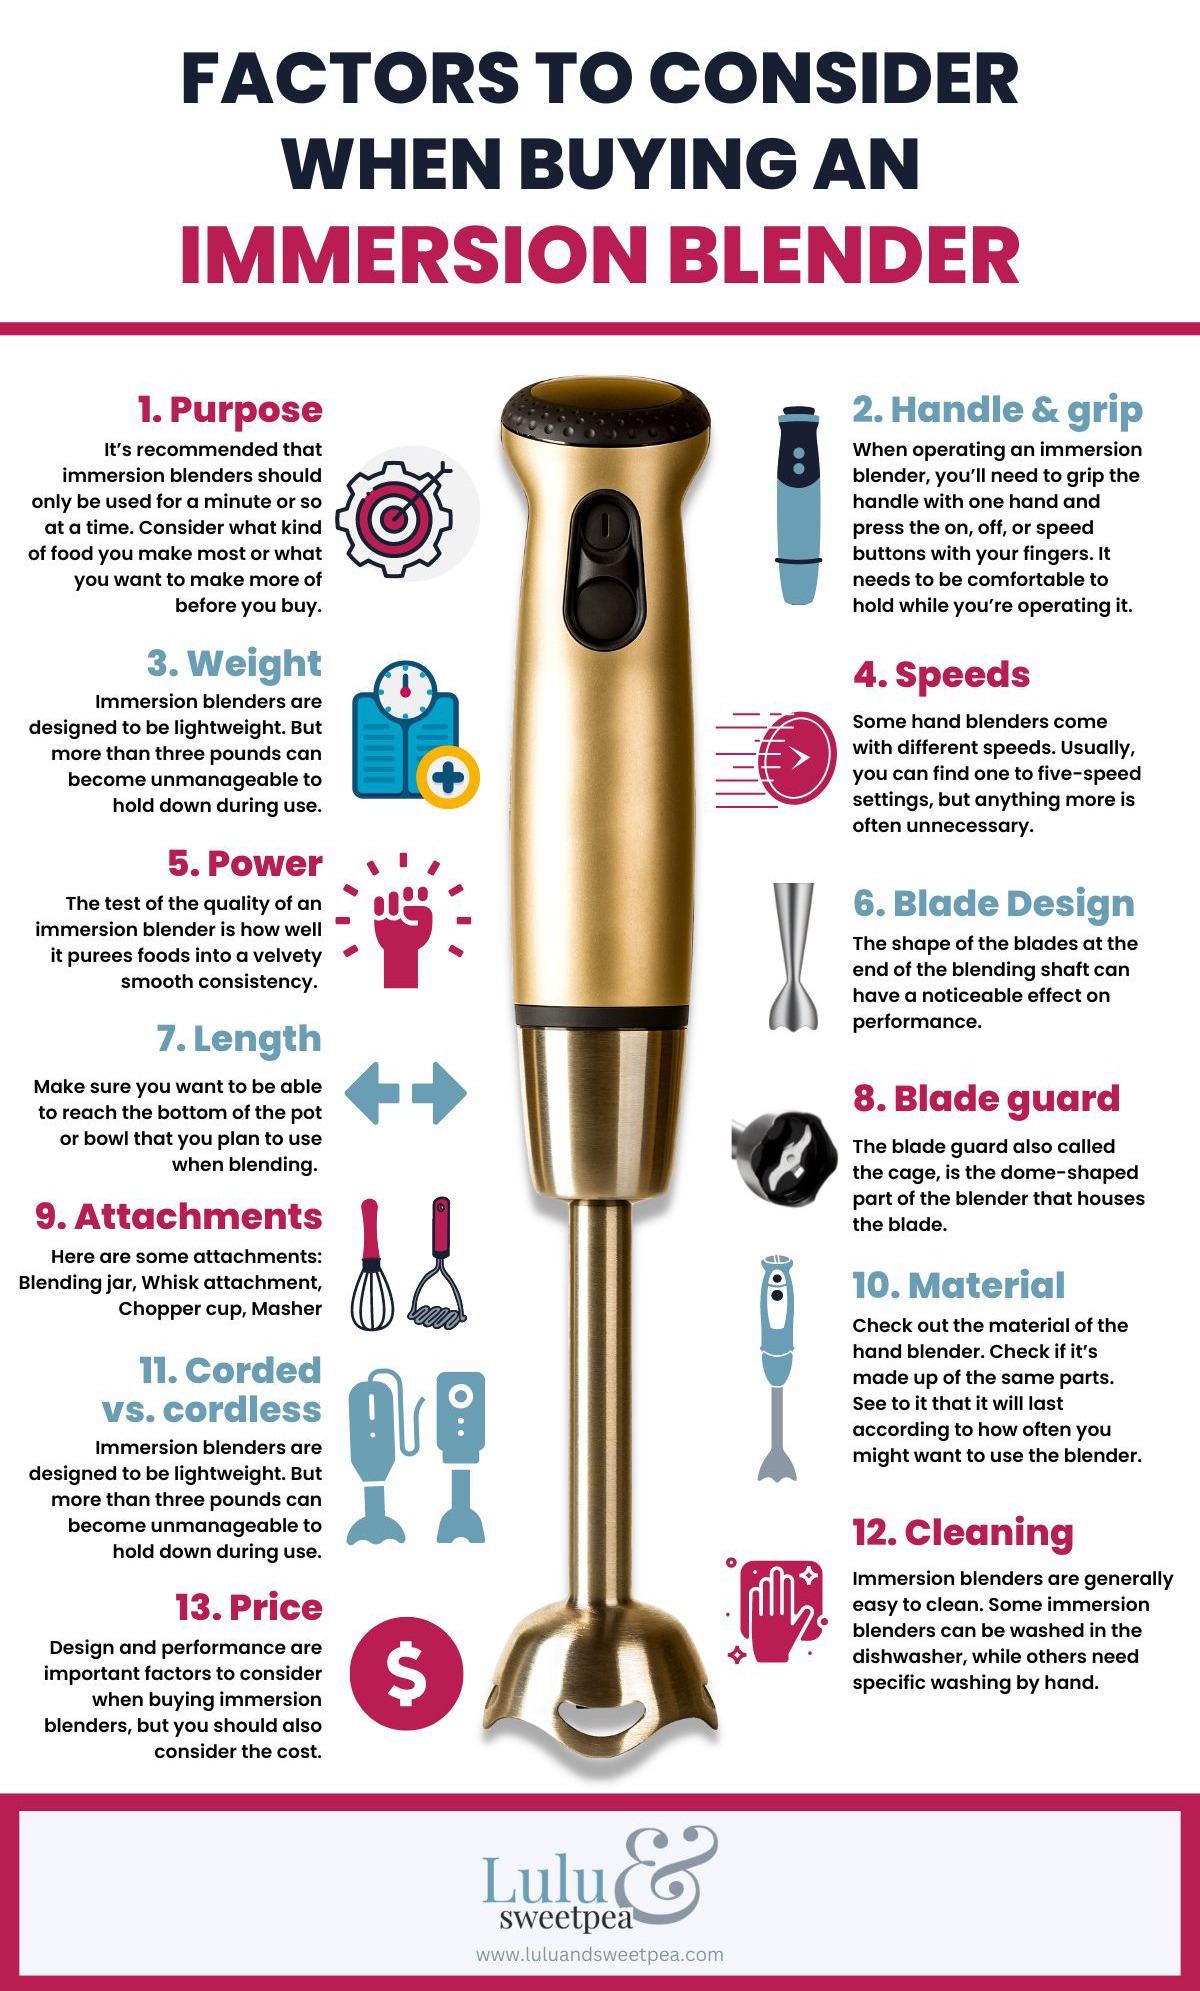 Factors to Consider When Buying an Immersion Blender